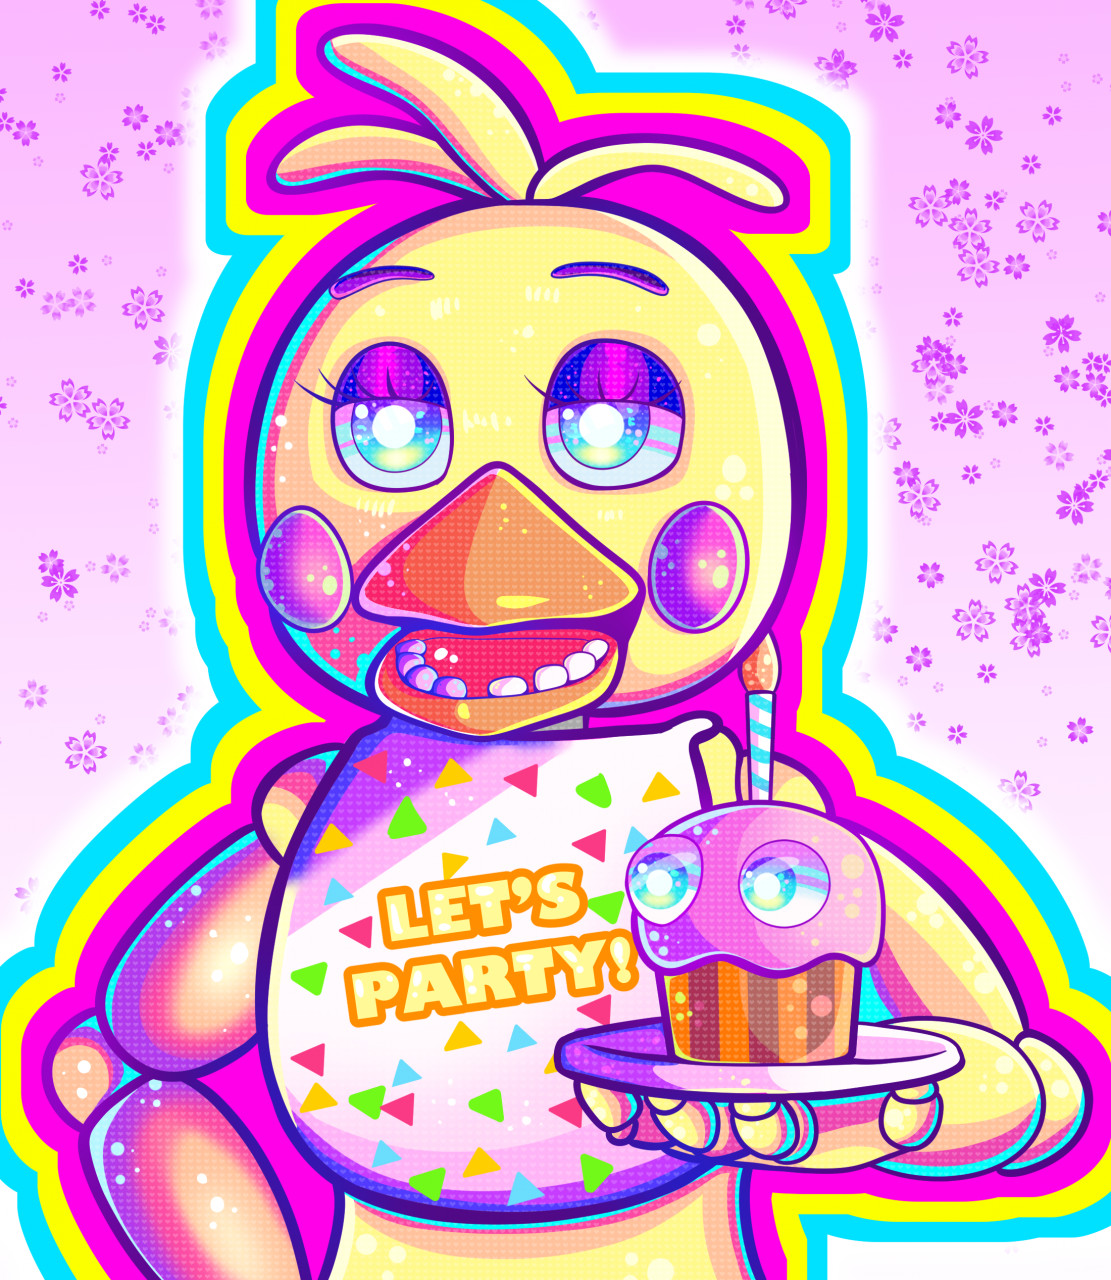 FNAF Chica Fan-art! by CandyCotton098 -- Fur Affinity [dot] net